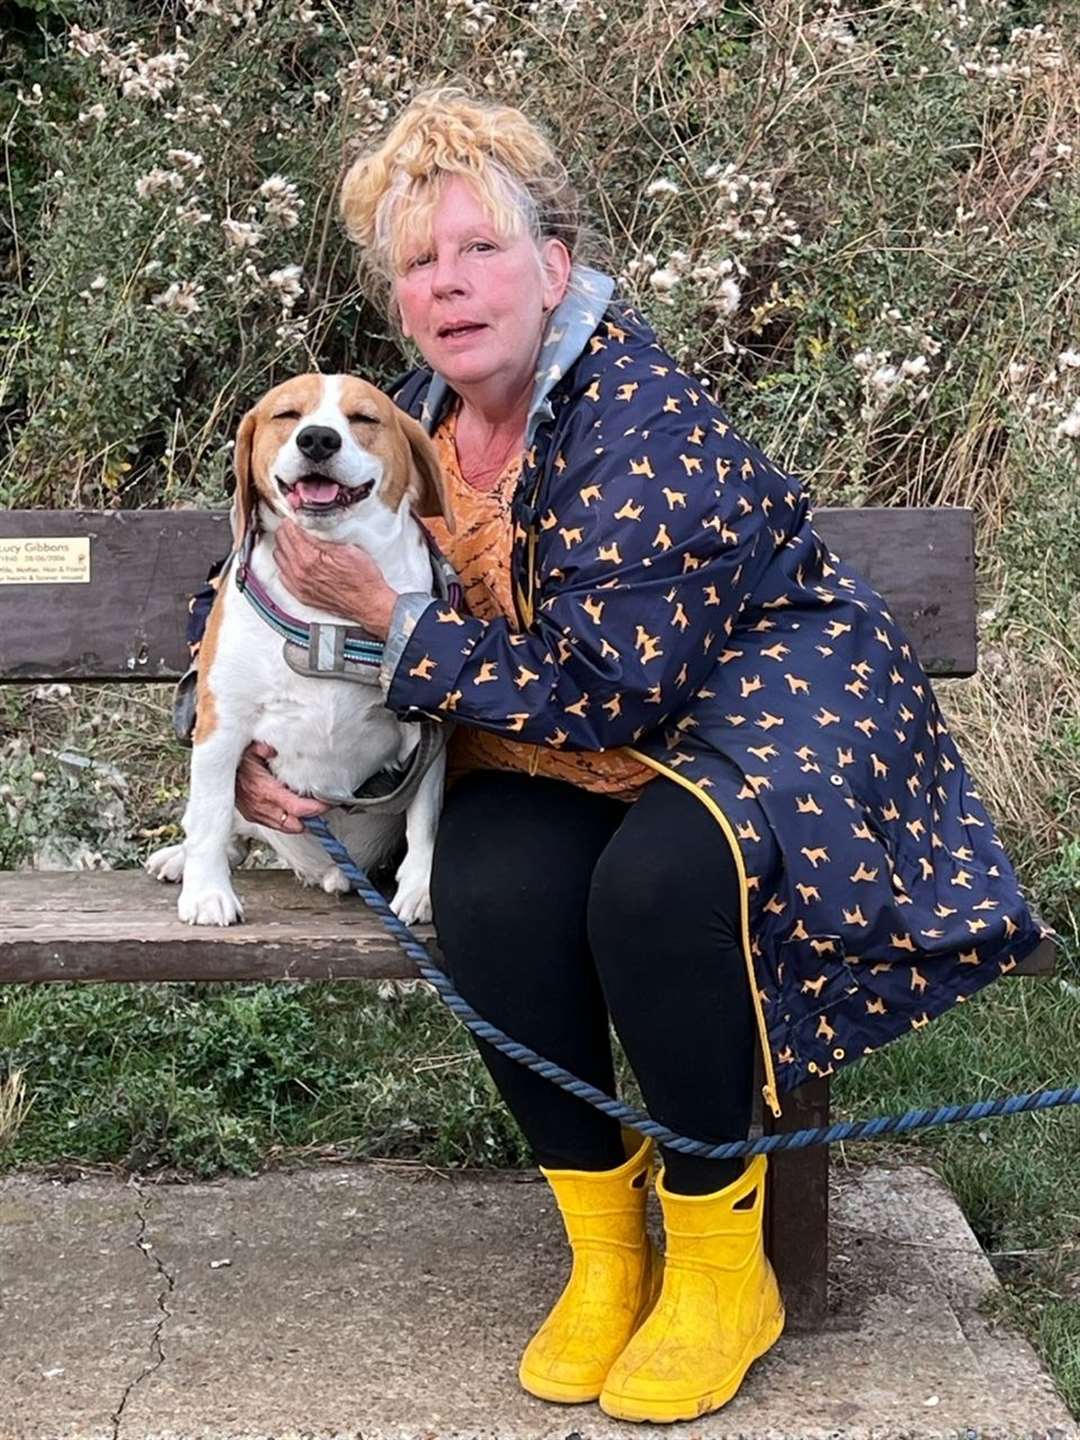 Miriam with her dog, Bert, who ate a soiled wet wipe on a footpath near a traveller site